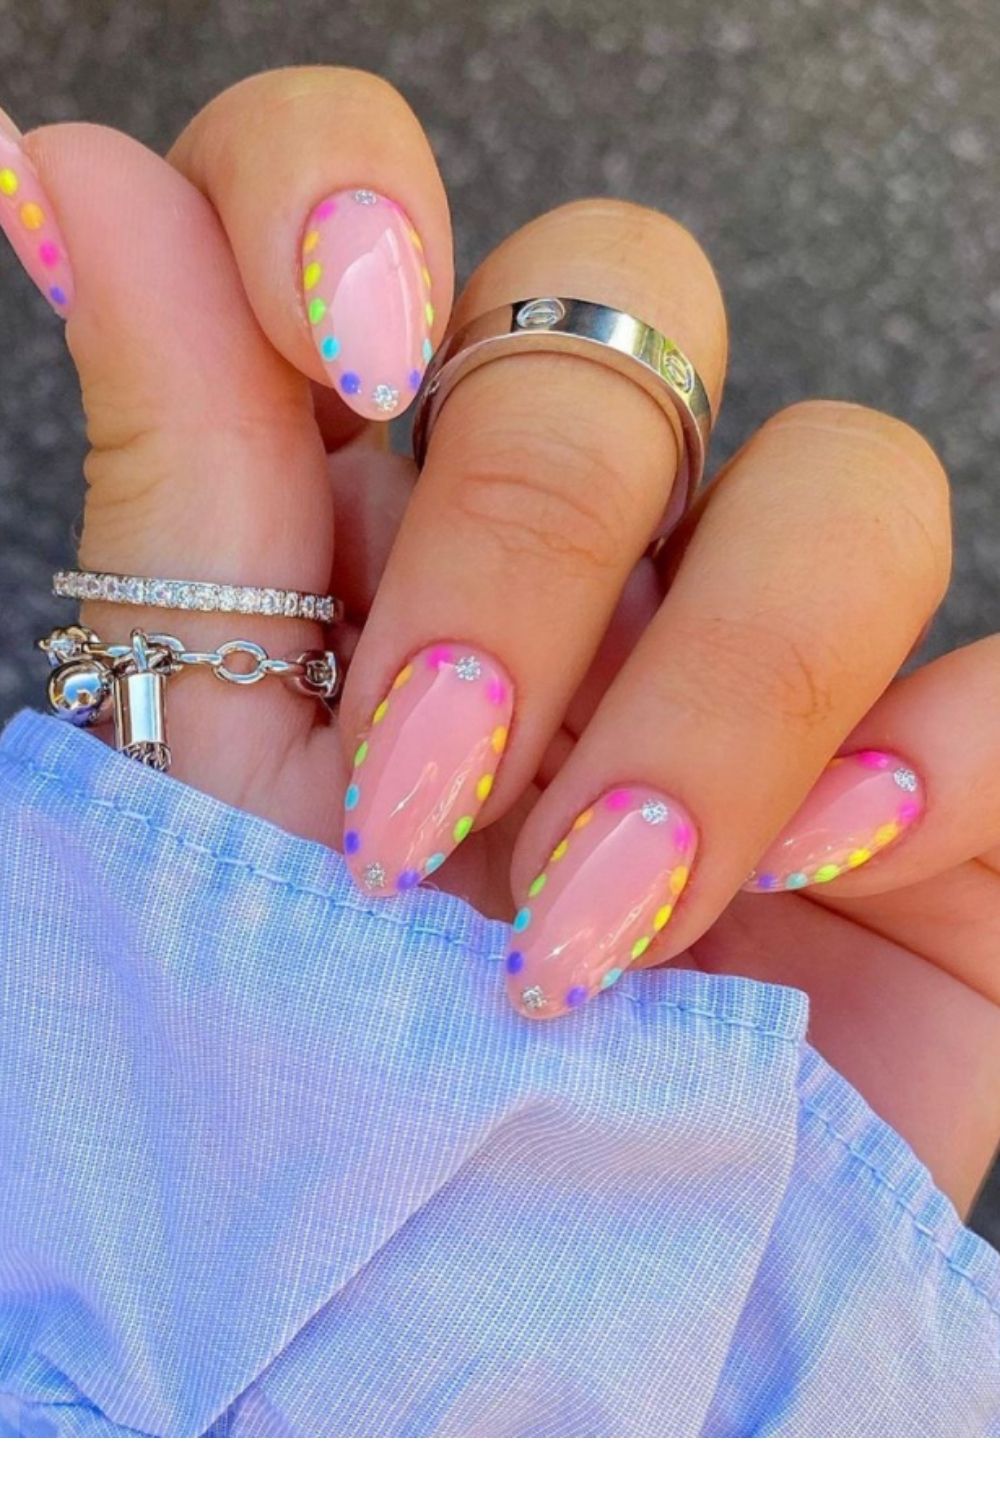 Cute Nail Designs For Almond Shape Daily Nail Art And Design